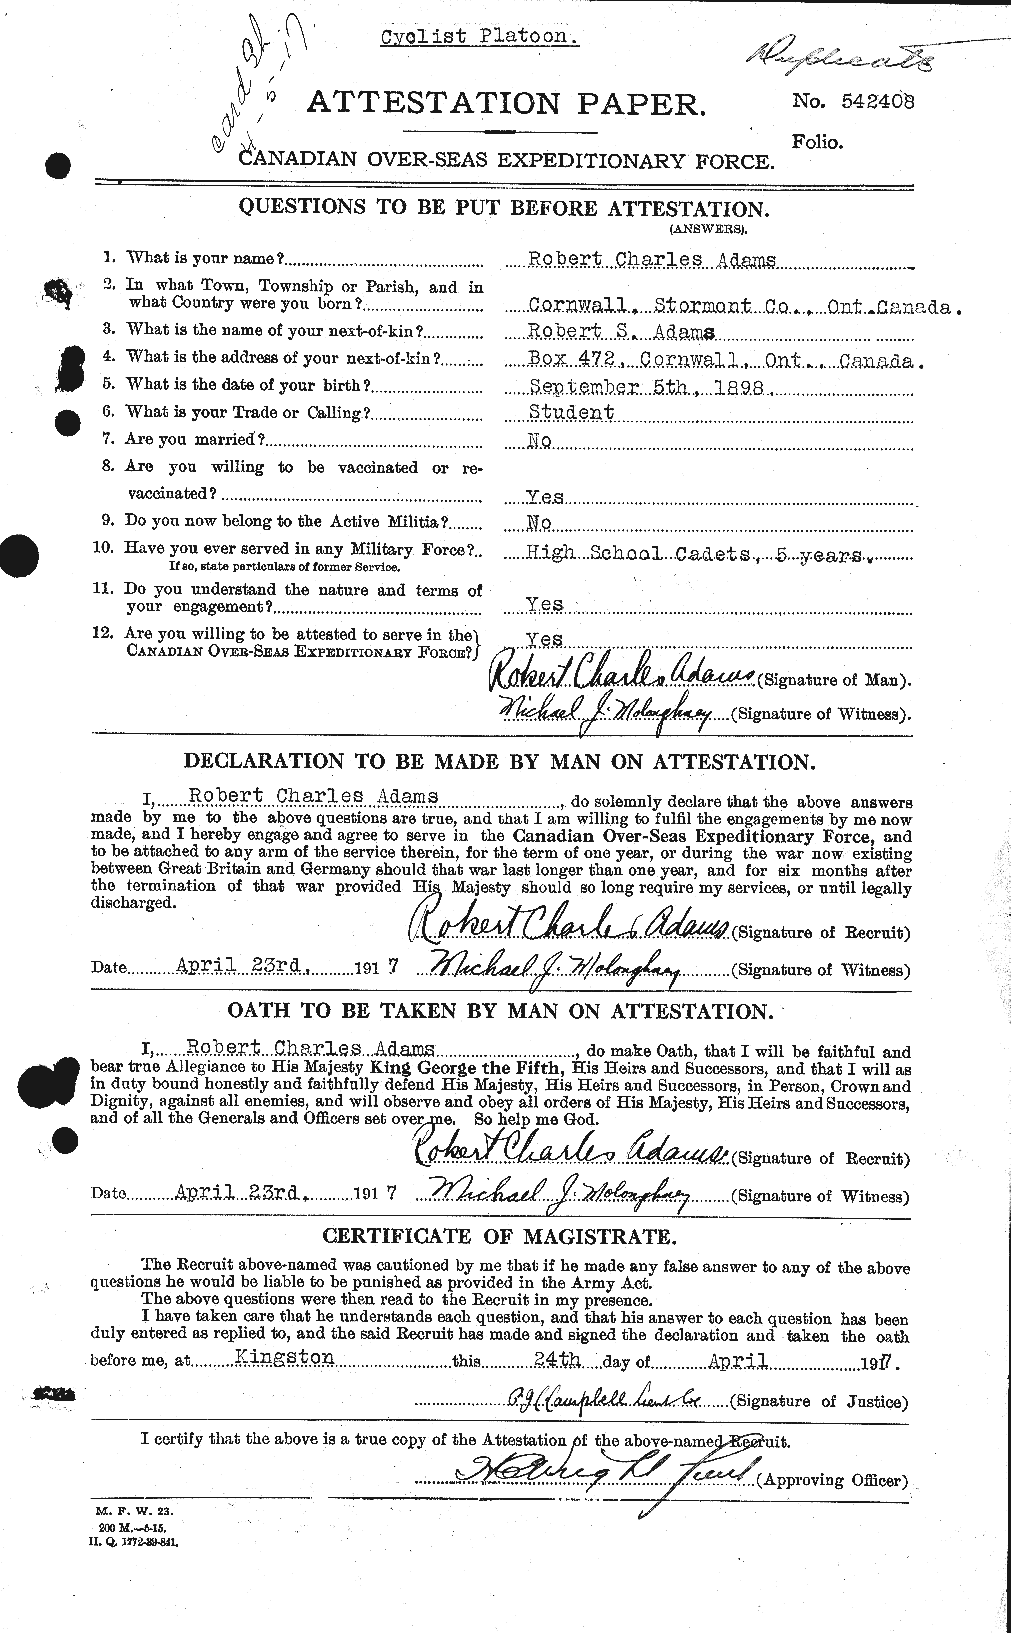 Personnel Records of the First World War - CEF 202099a